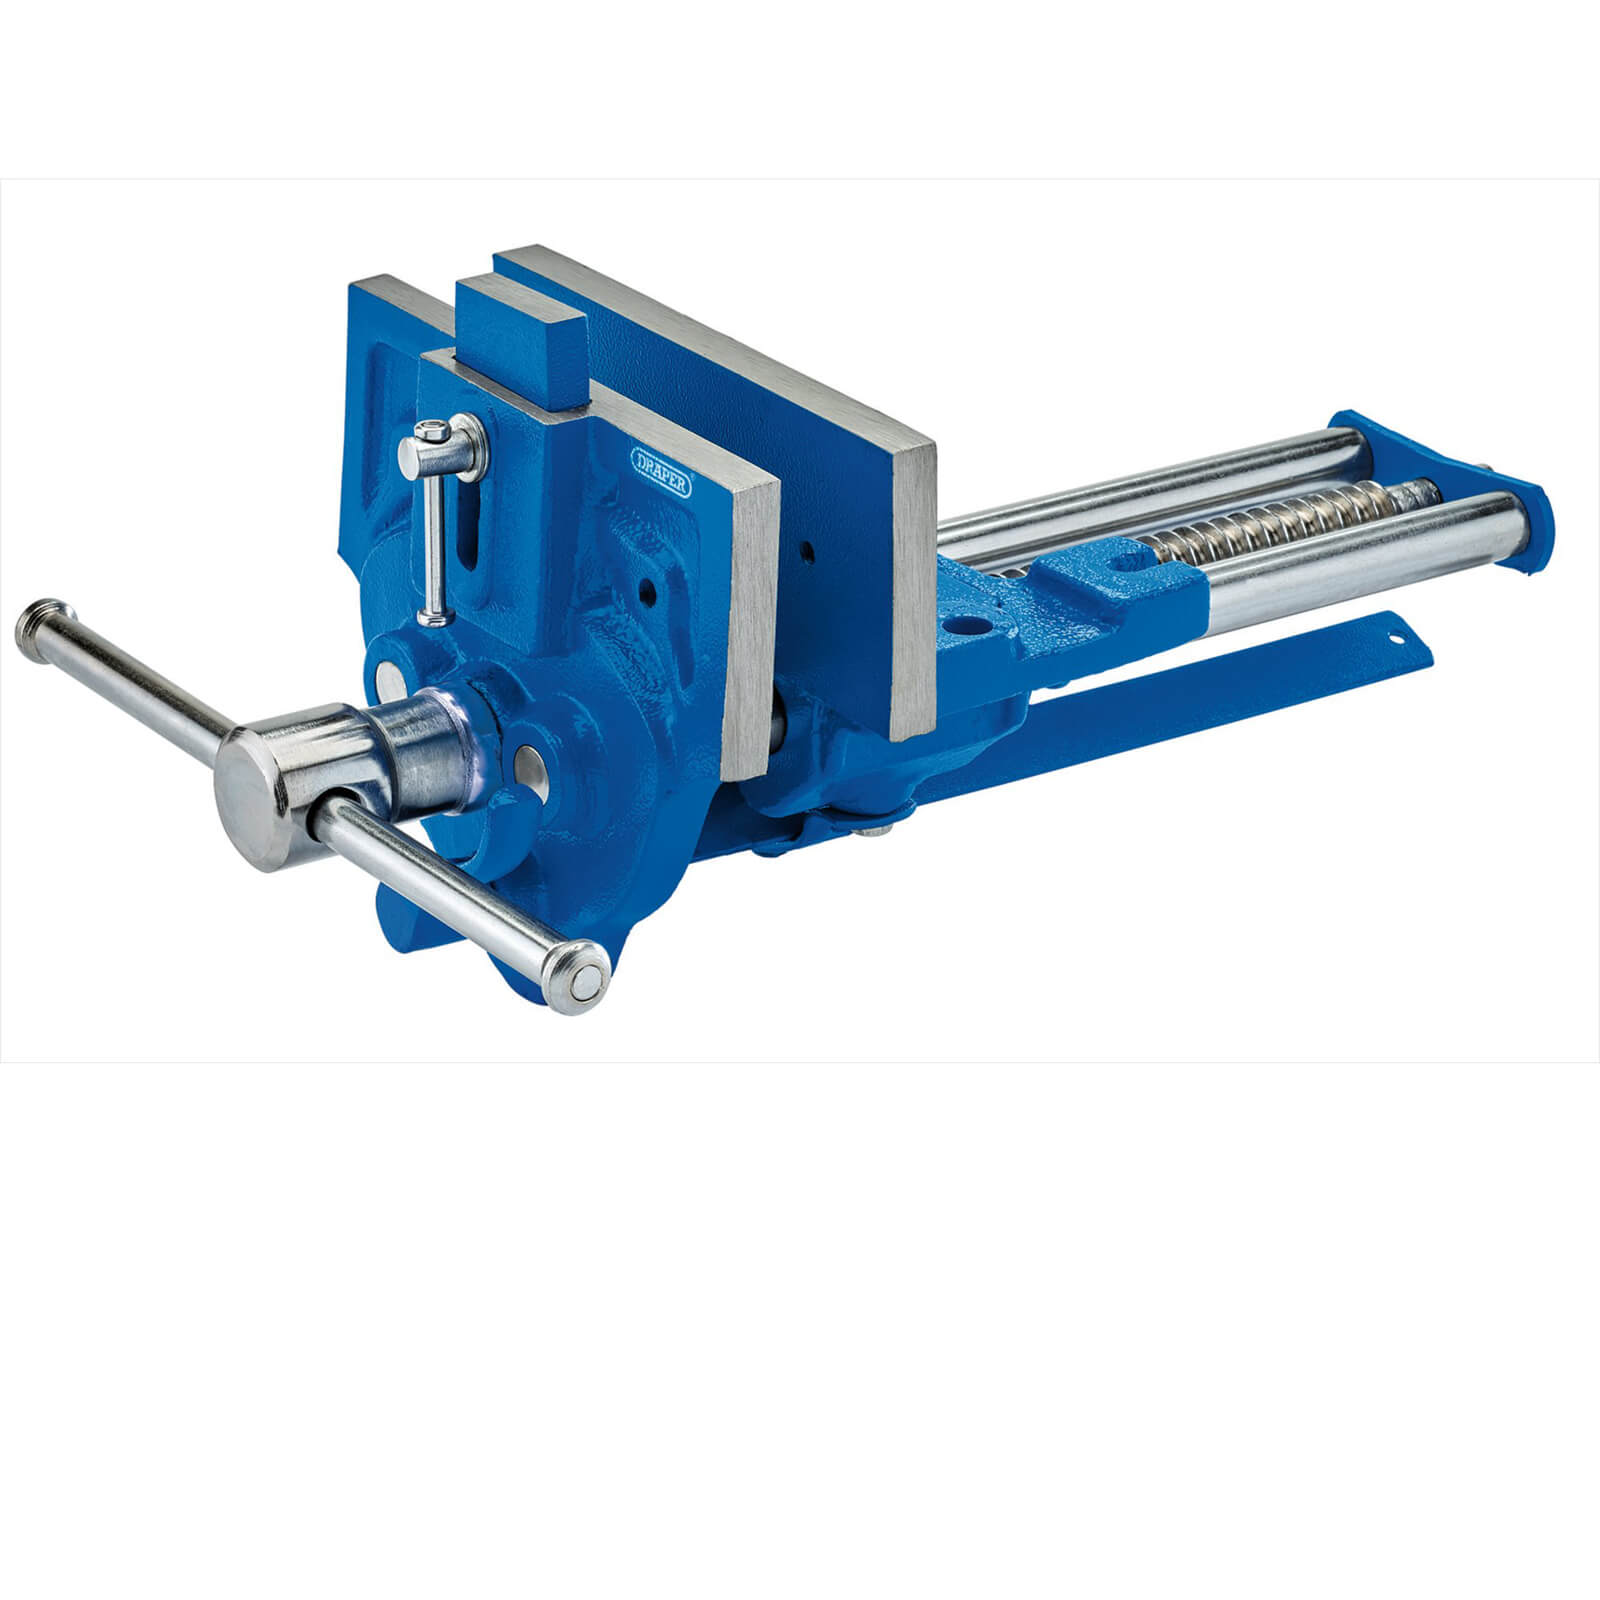 Image of Draper Quick Release Woodworking Bench Vice 175mm